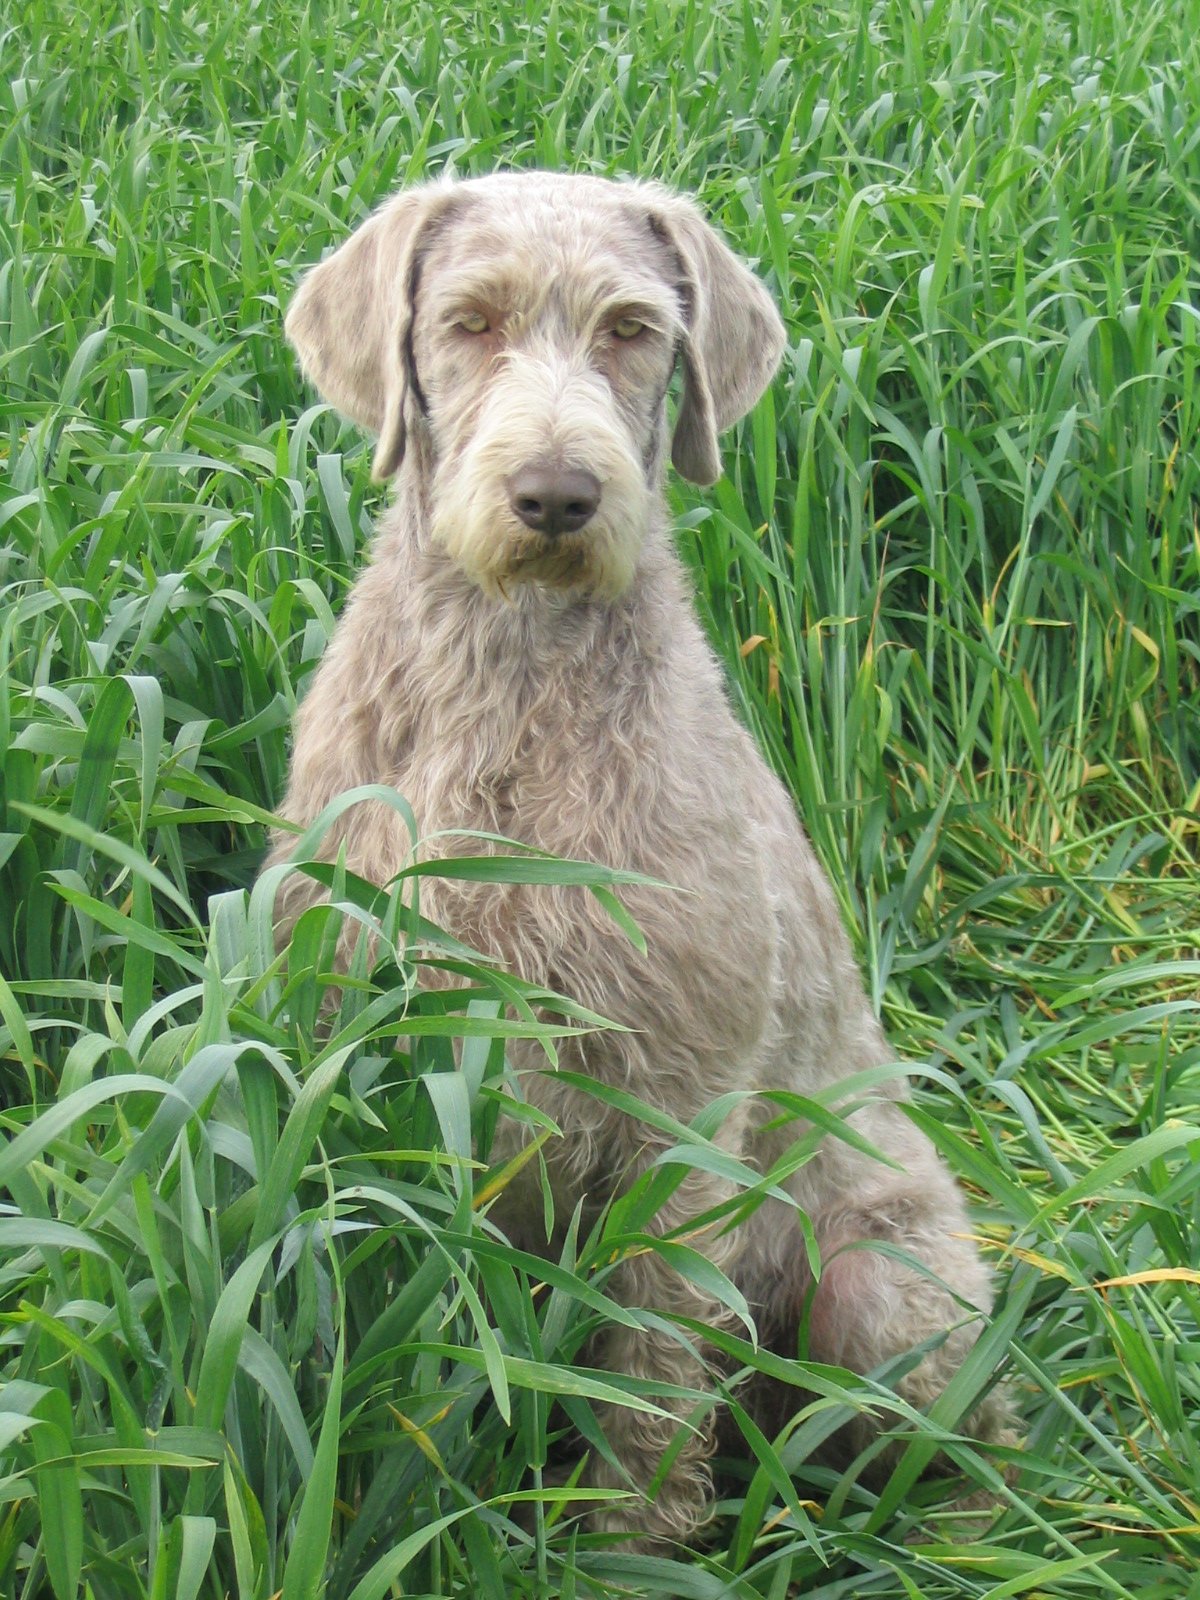 Slovak Rough-haired Pointer - Wikipedia